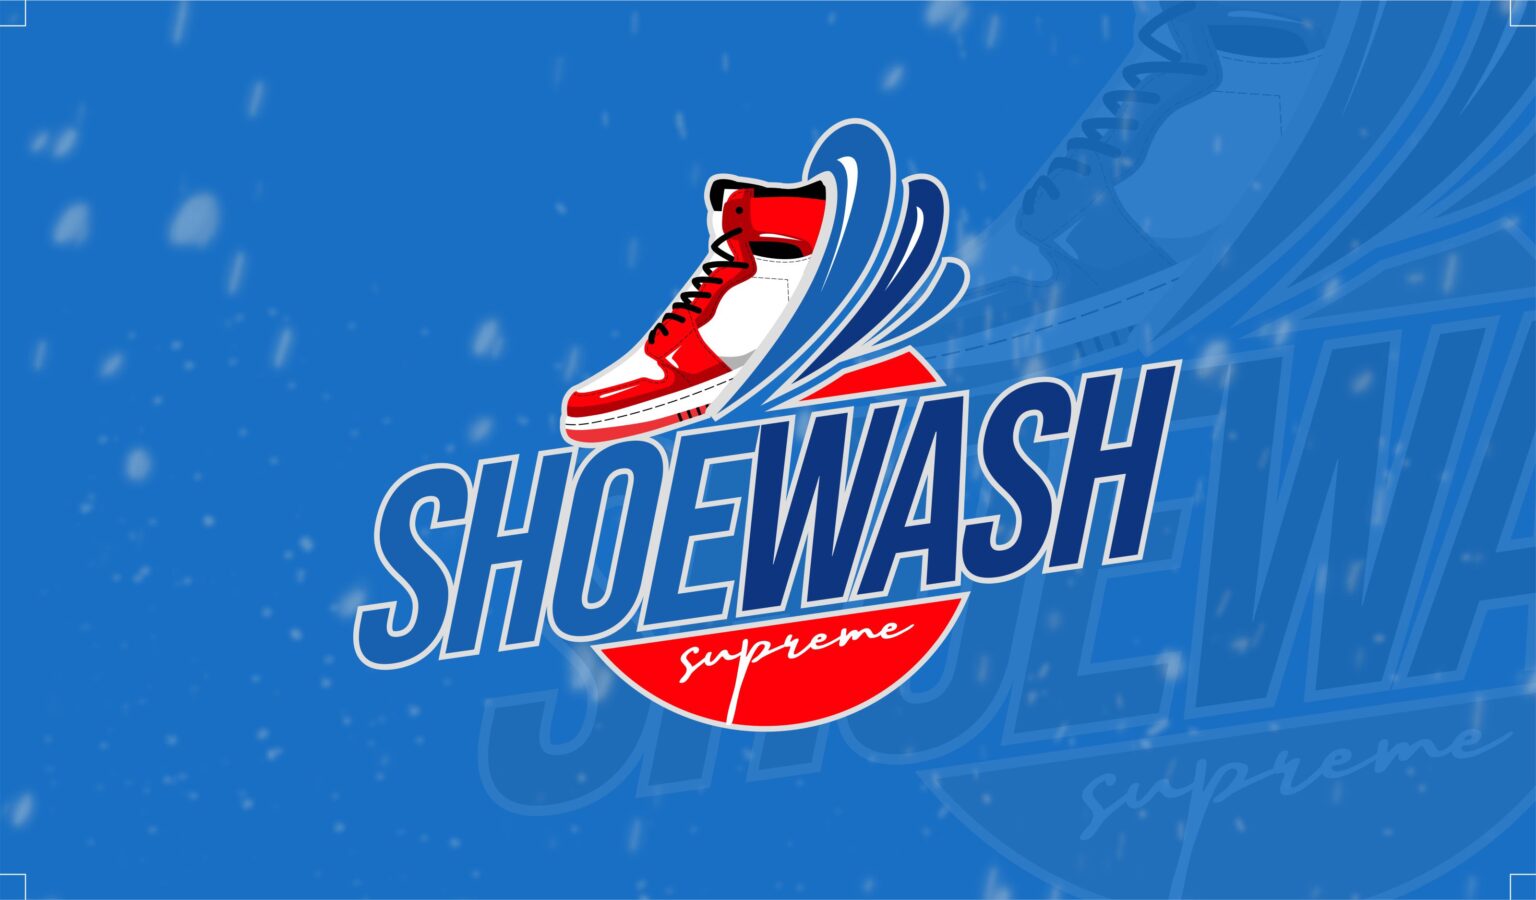 Vancouver's #1 Shoe Cleaning and Repair Service | Shoewash